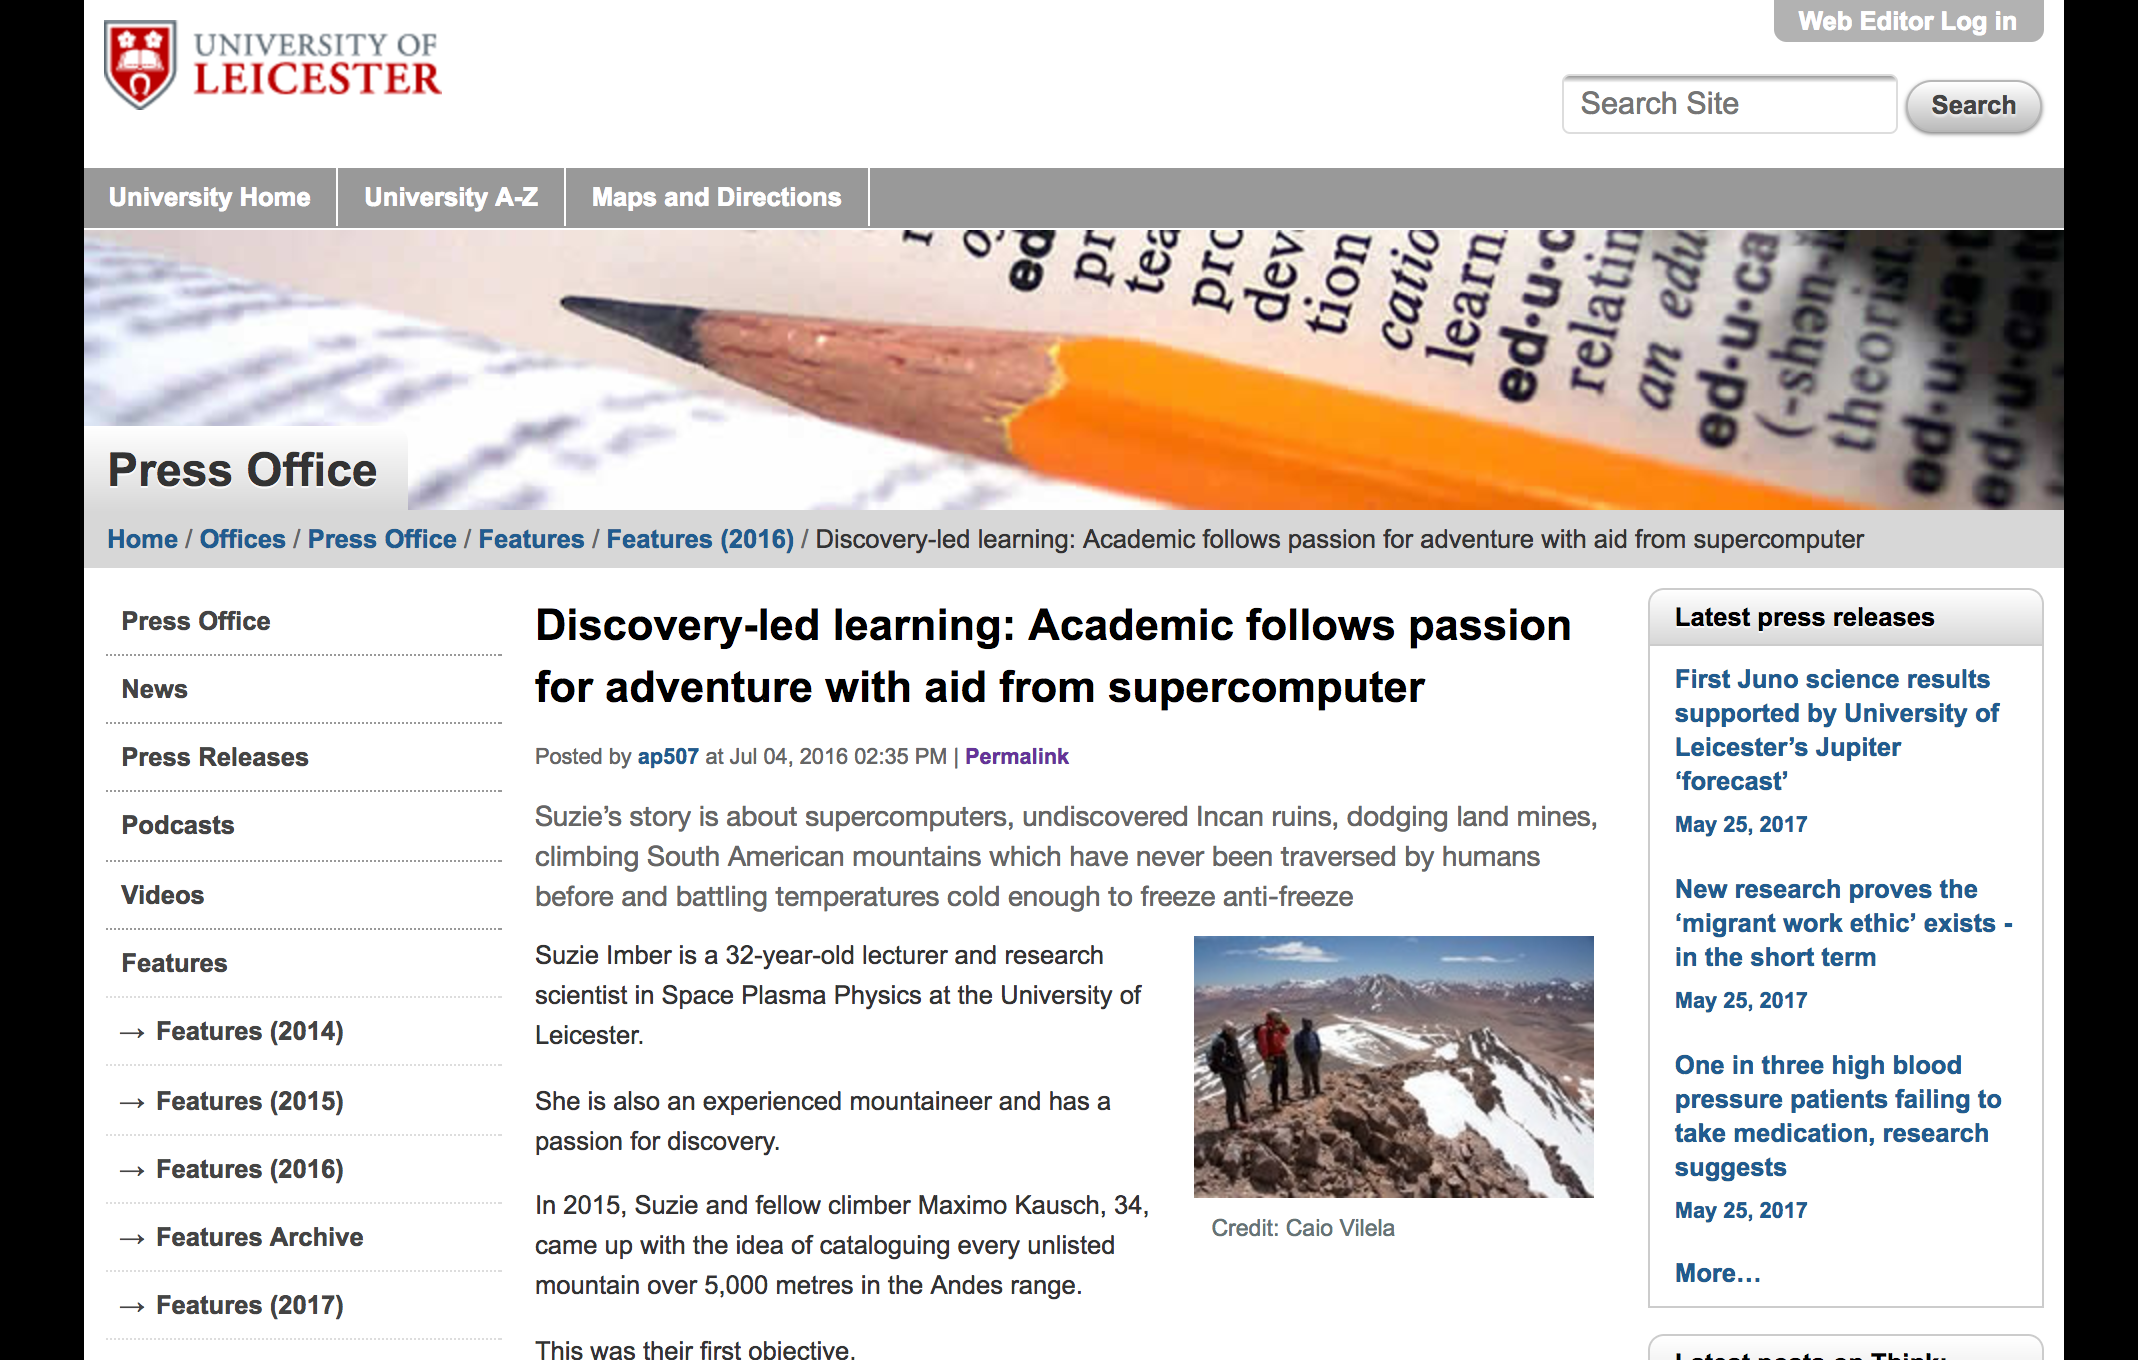 discoveryled-learning-academic-follows-passion-for-adventure-with-aid-from-supercomputer